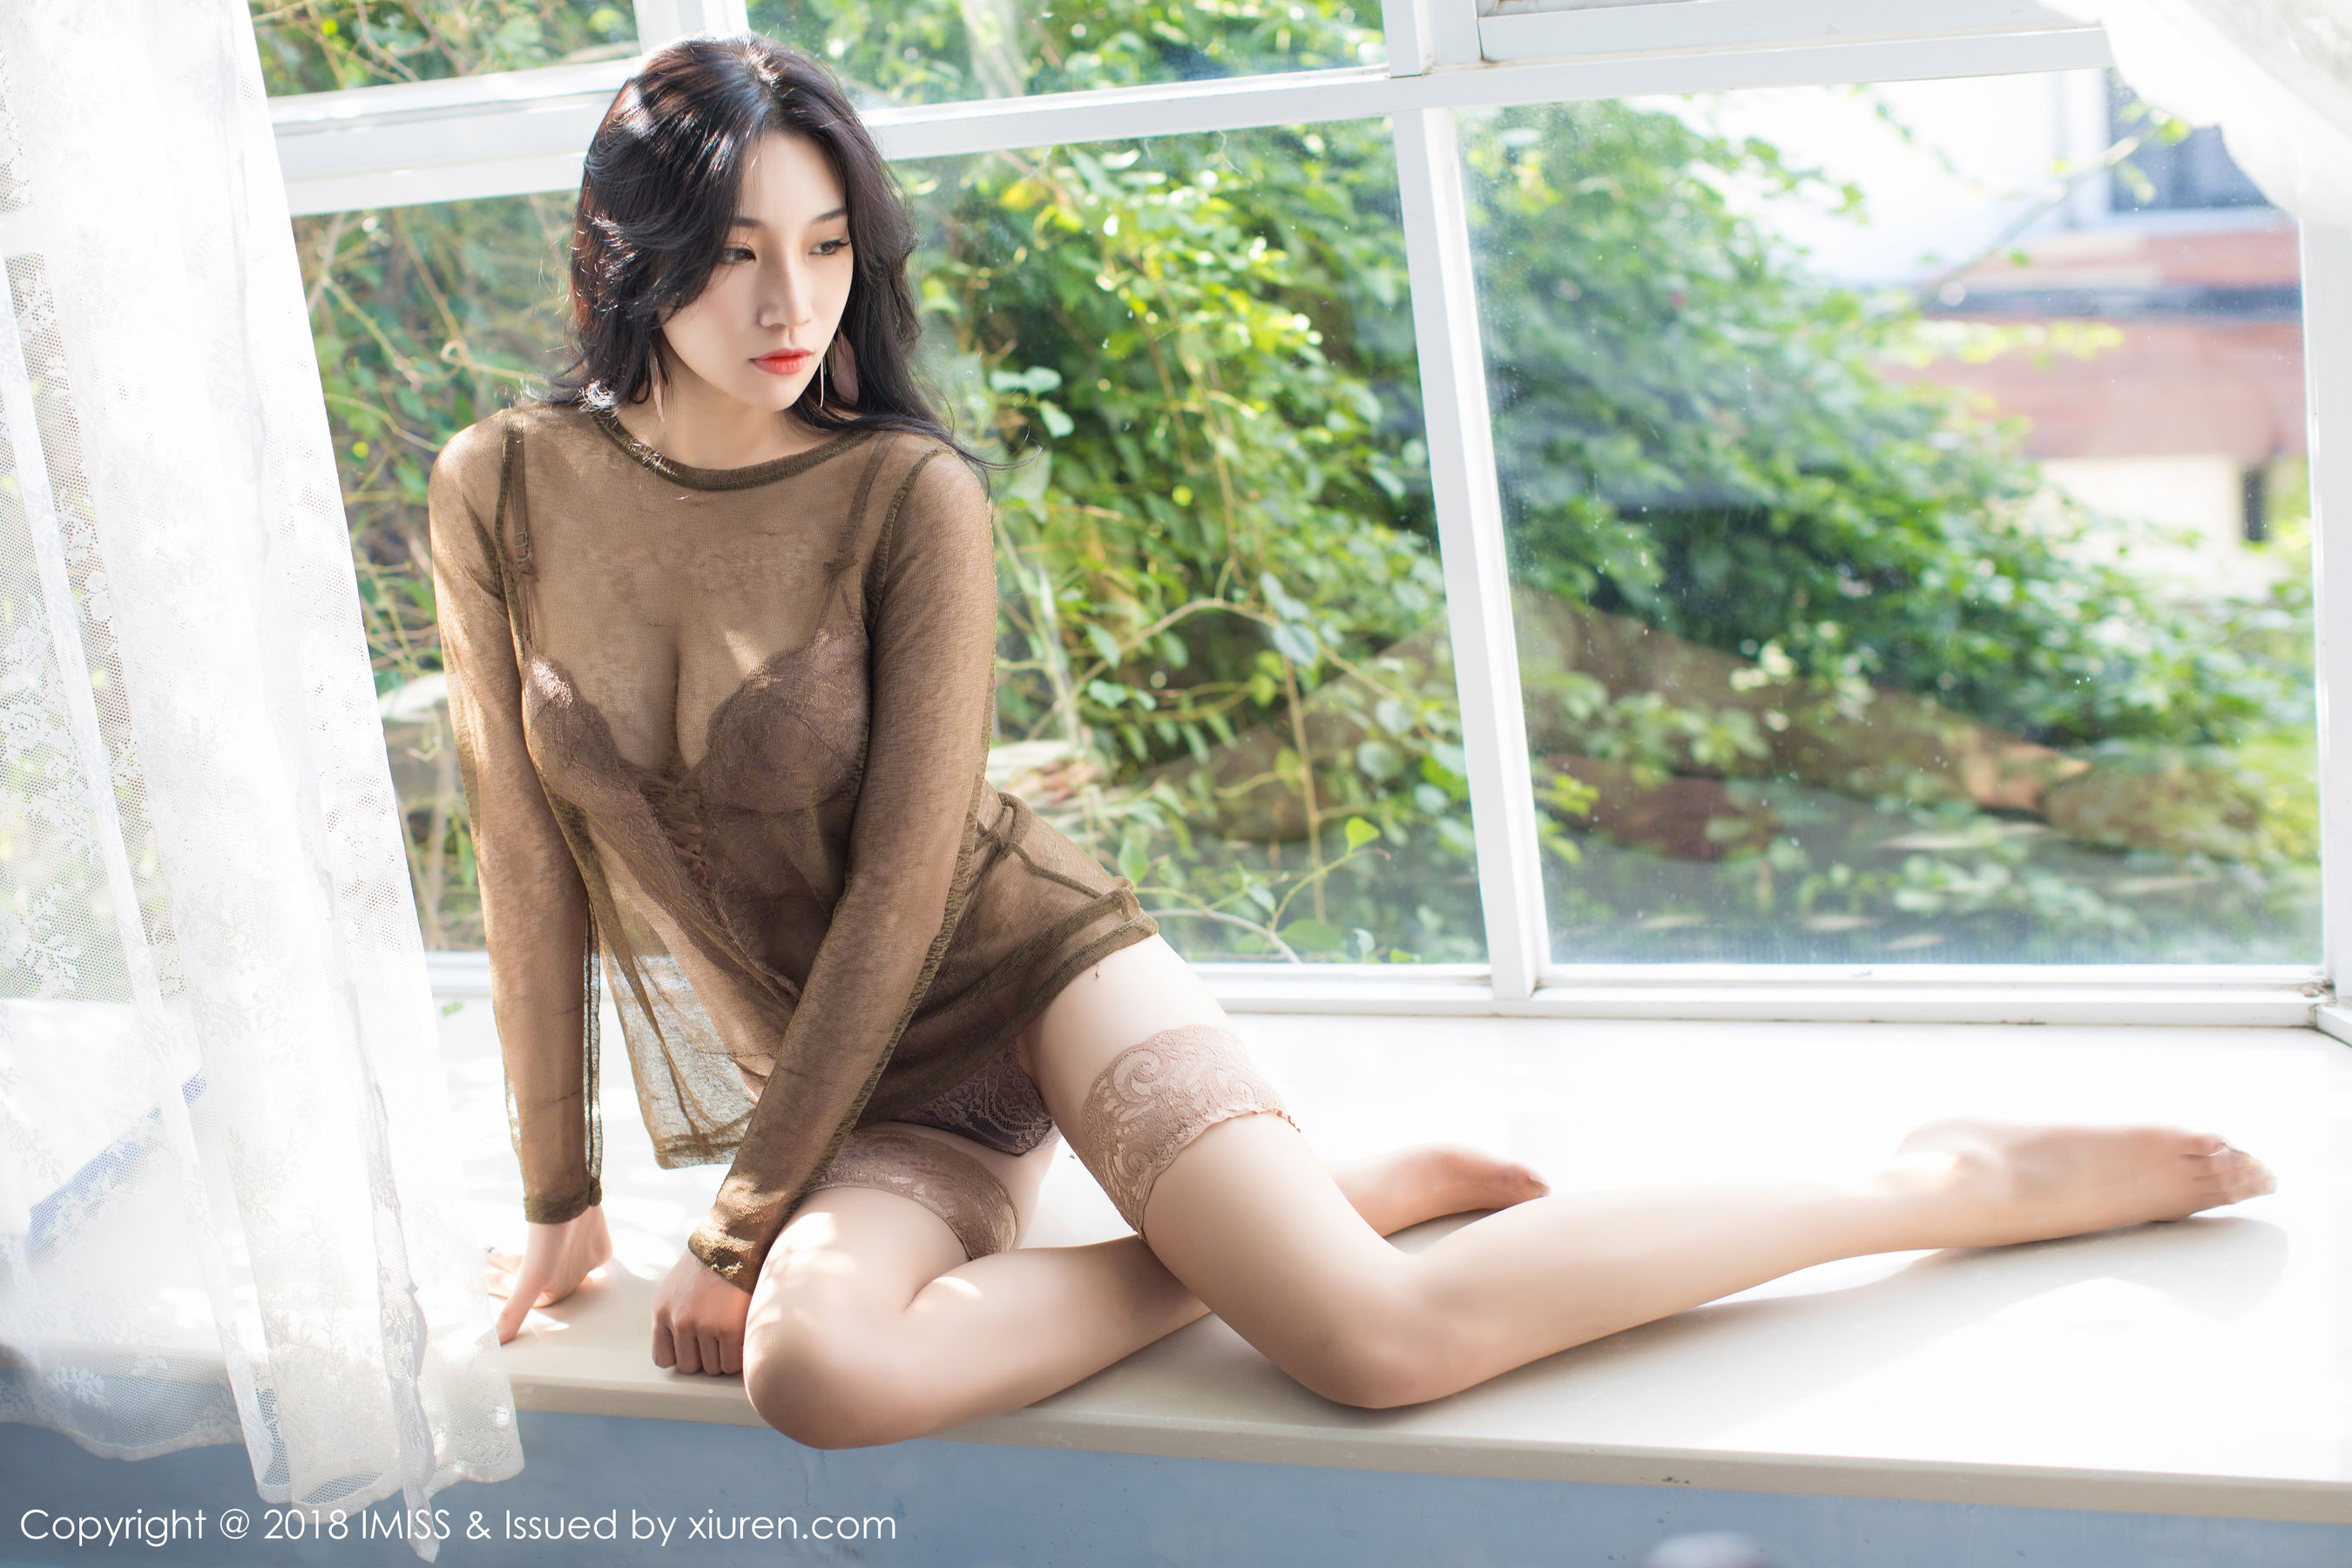 Little Fox SICA Extremely Seduced Stockings Beautiful Leg Series Ai Mishe IMISS VOL.218